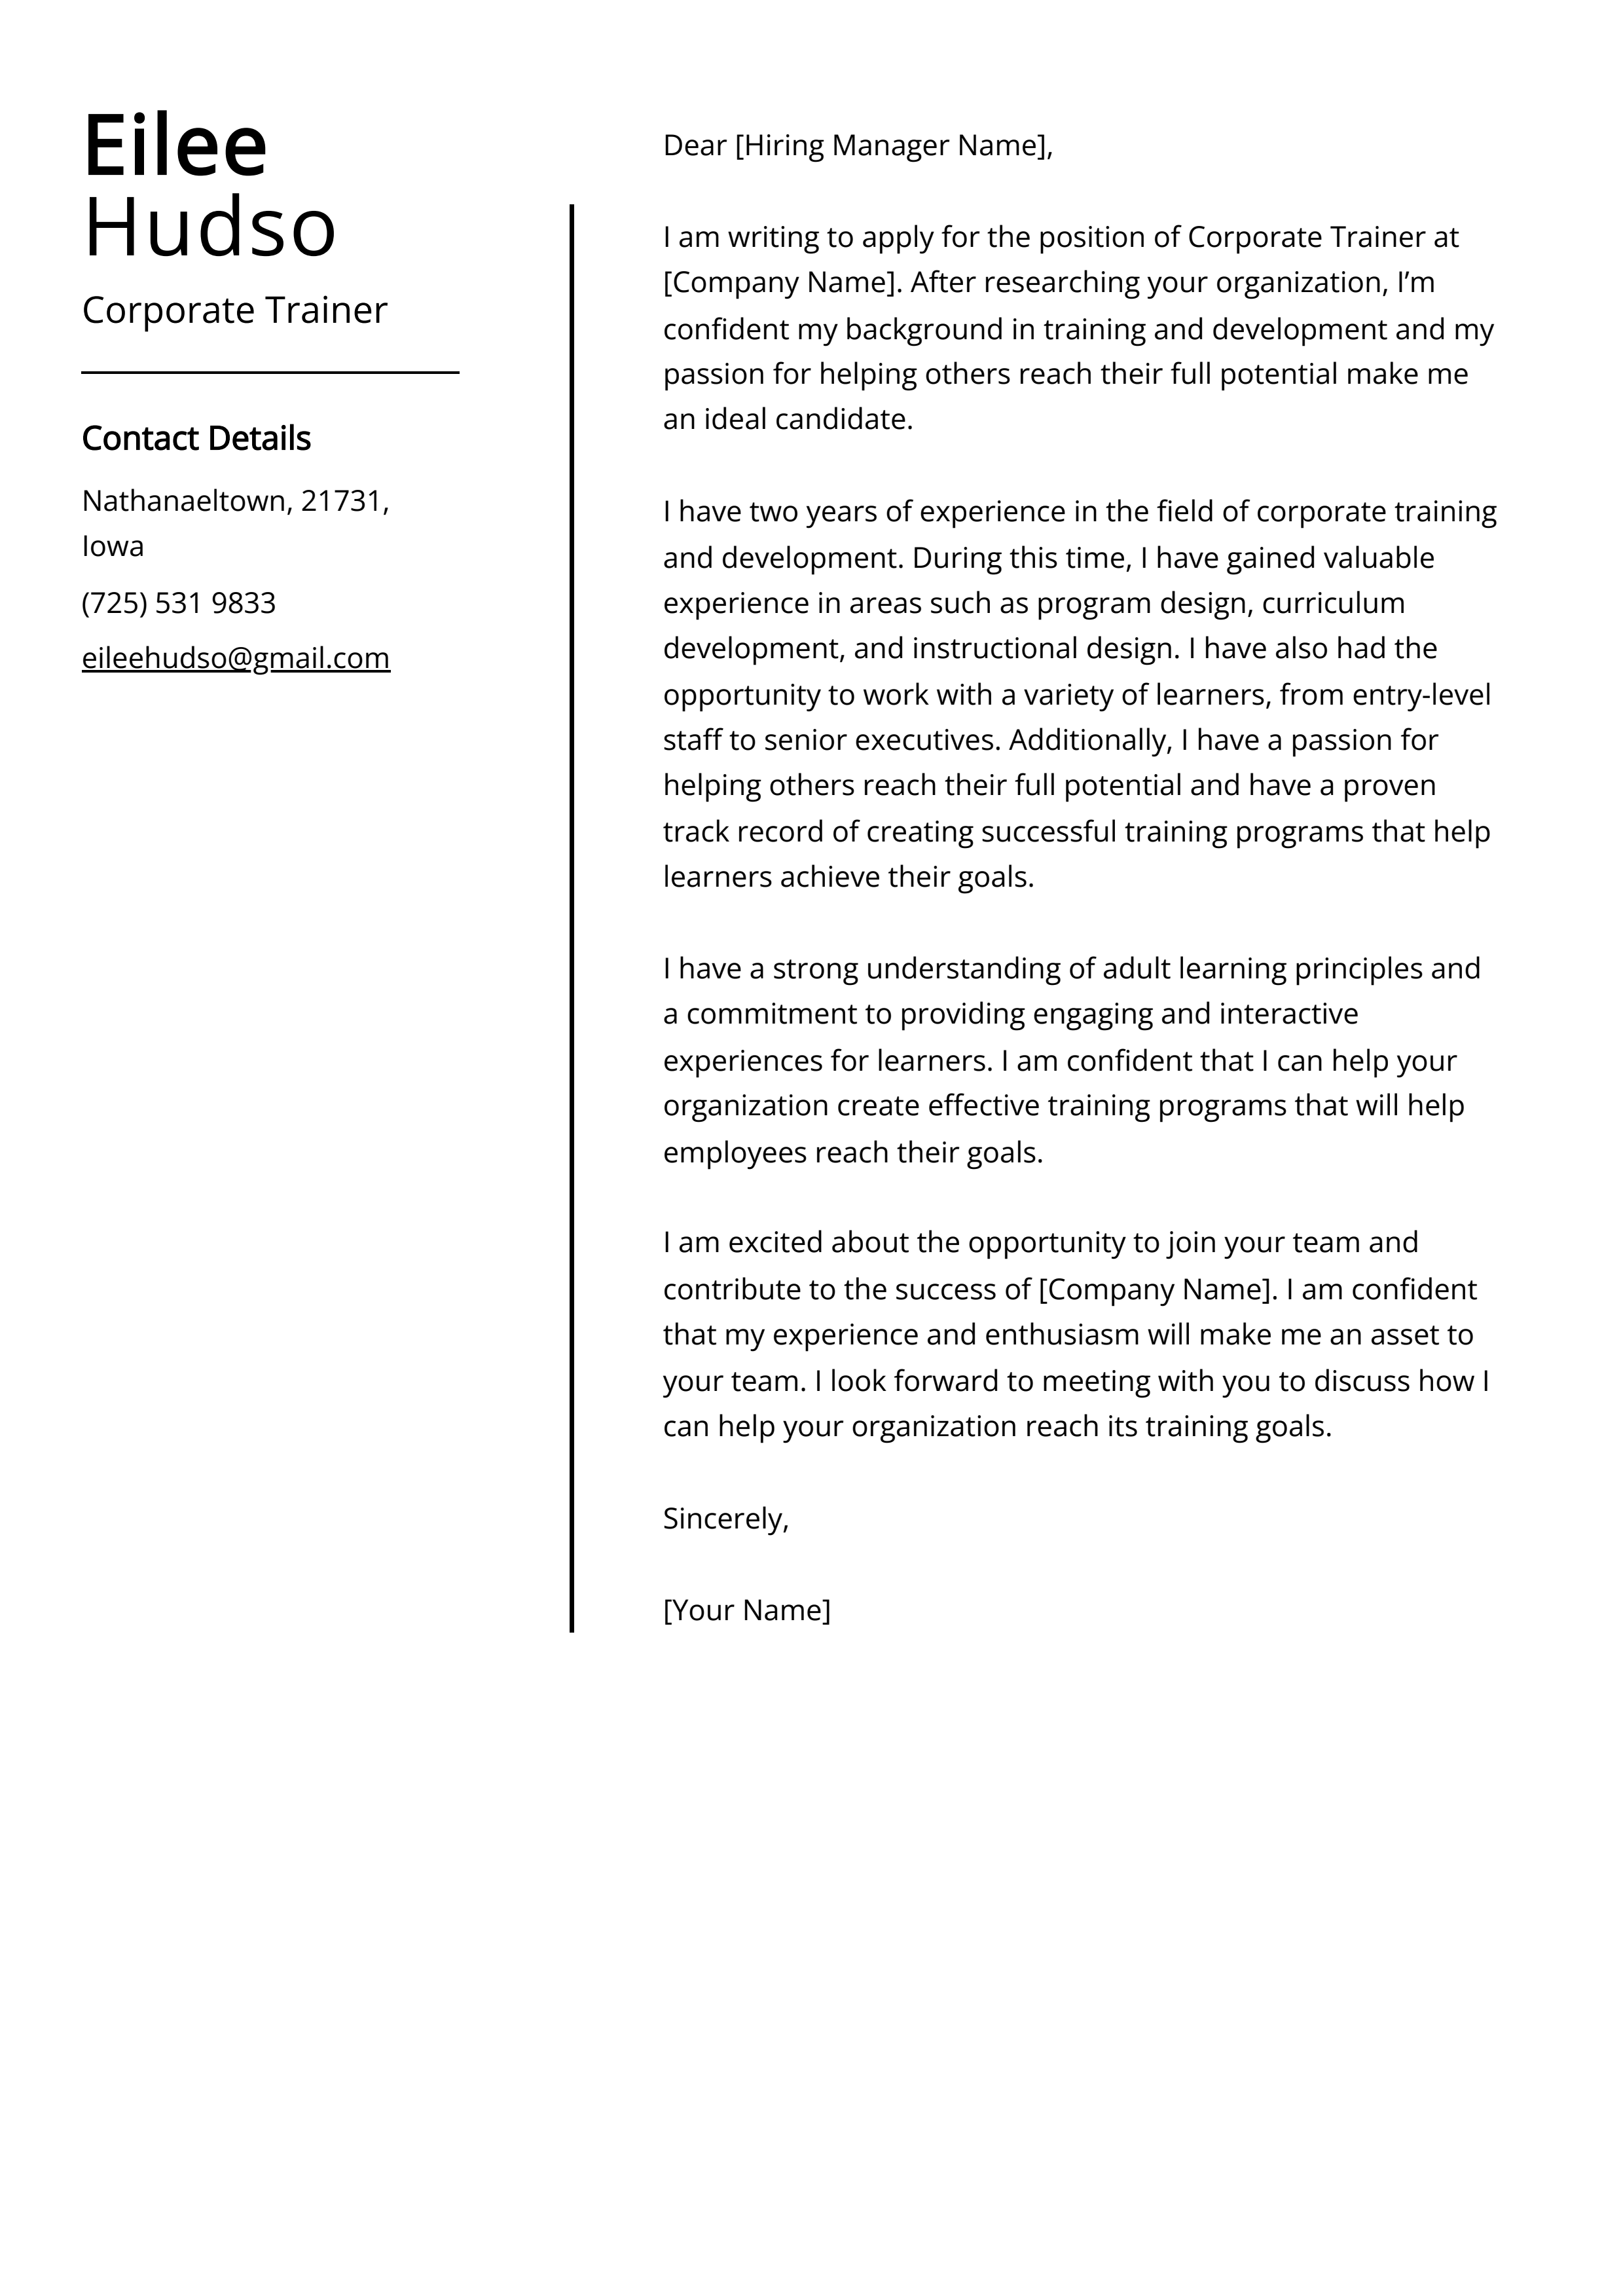 Corporate Trainer Cover Letter Example